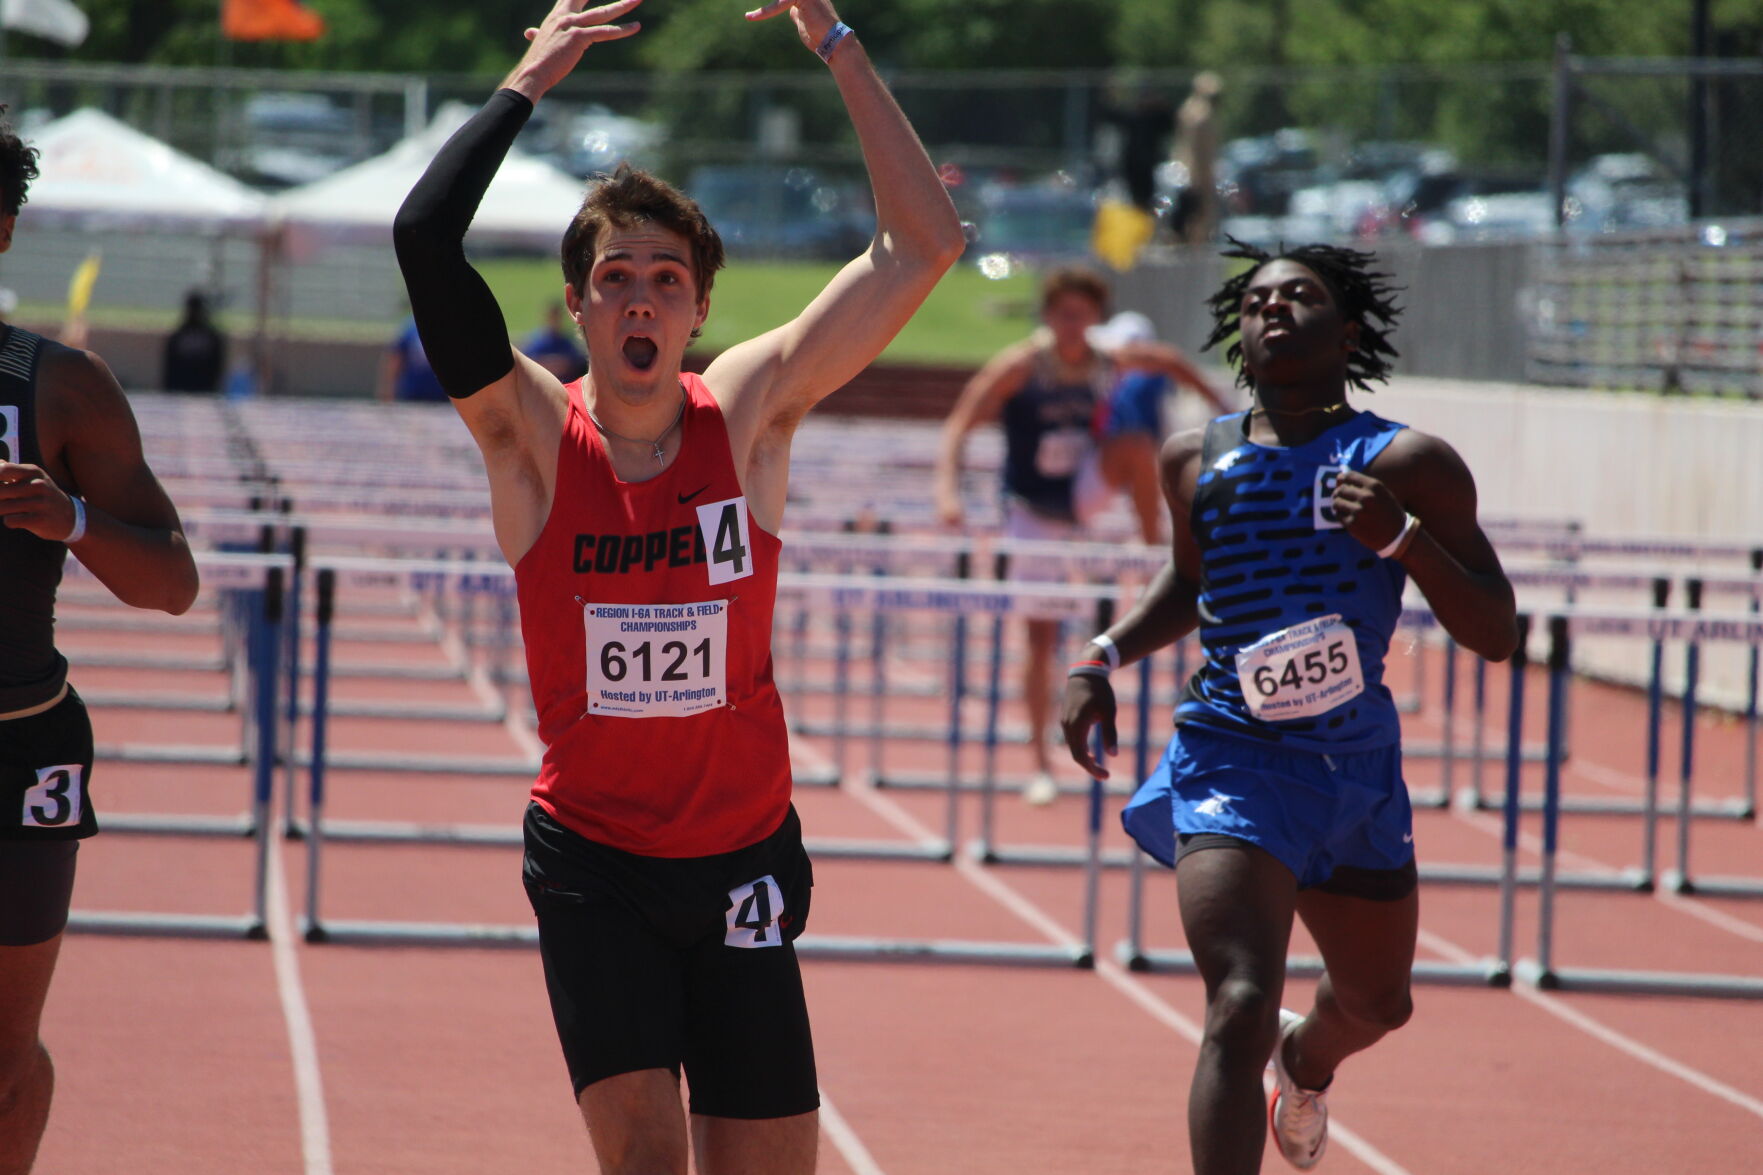 Running down a dream: Work ethic helps Coppell’s McFarlane to overcome past injuries, earn podium finish in at state track meet